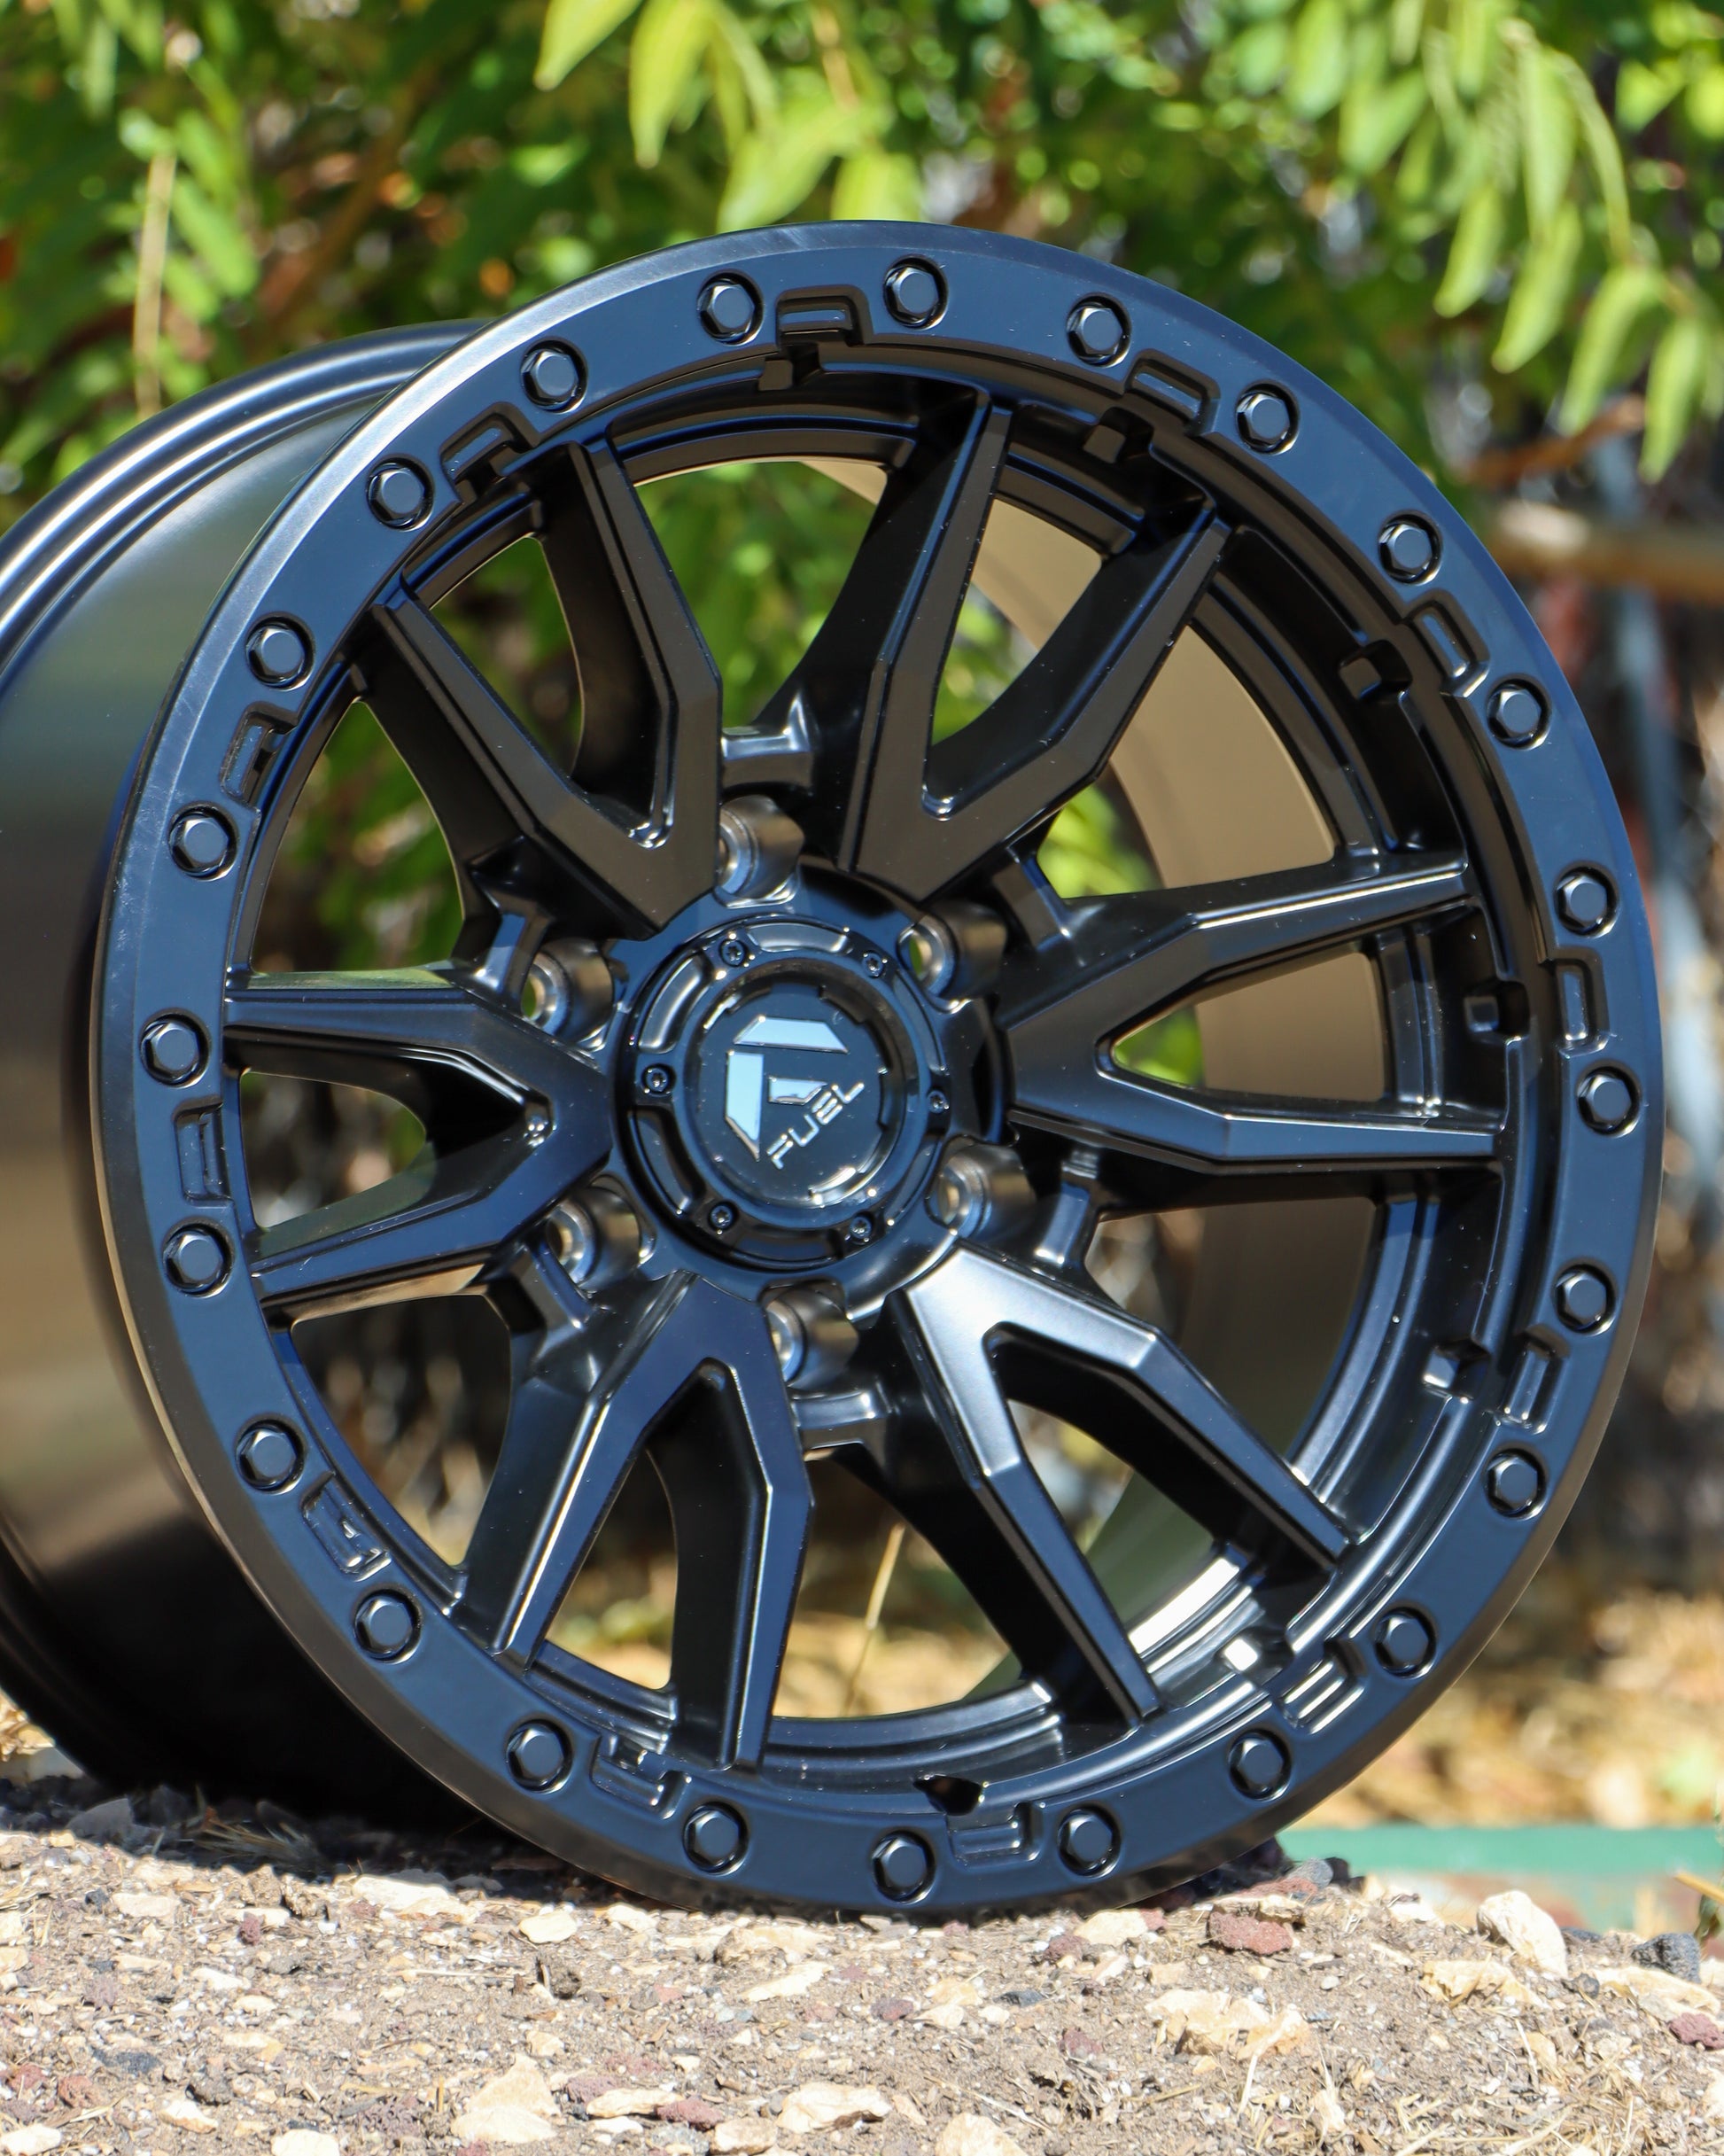 Fuel Rebel Wheel in matte black, at an angle on the ground with dirt and rocks under it.